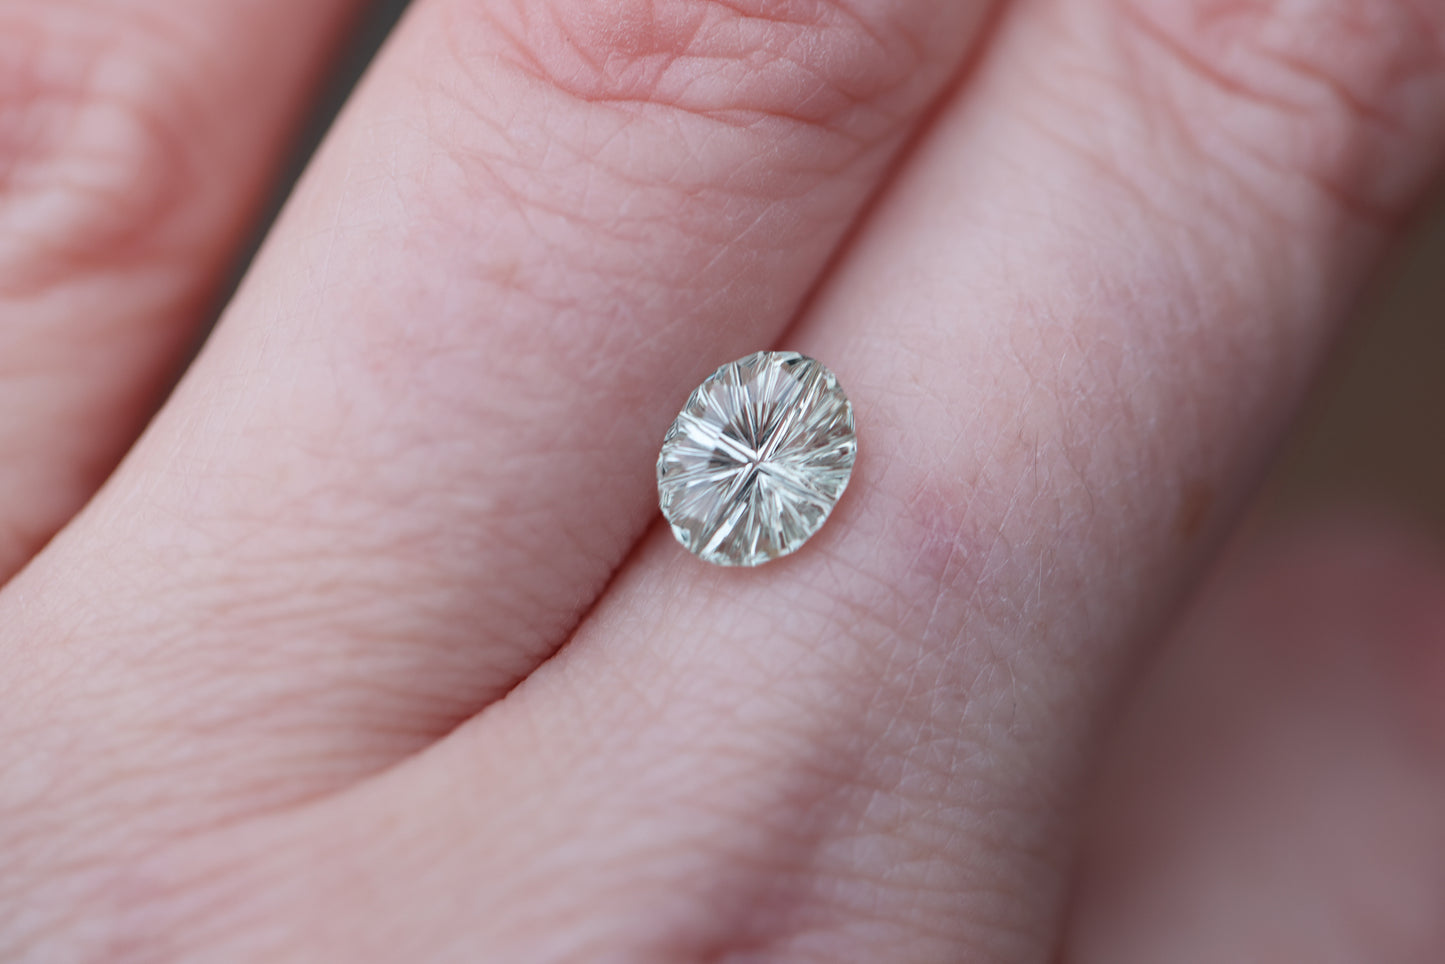 Load image into Gallery viewer, 1.44ct oval very pale green sapphire - Starbrite cut by John Dyer
